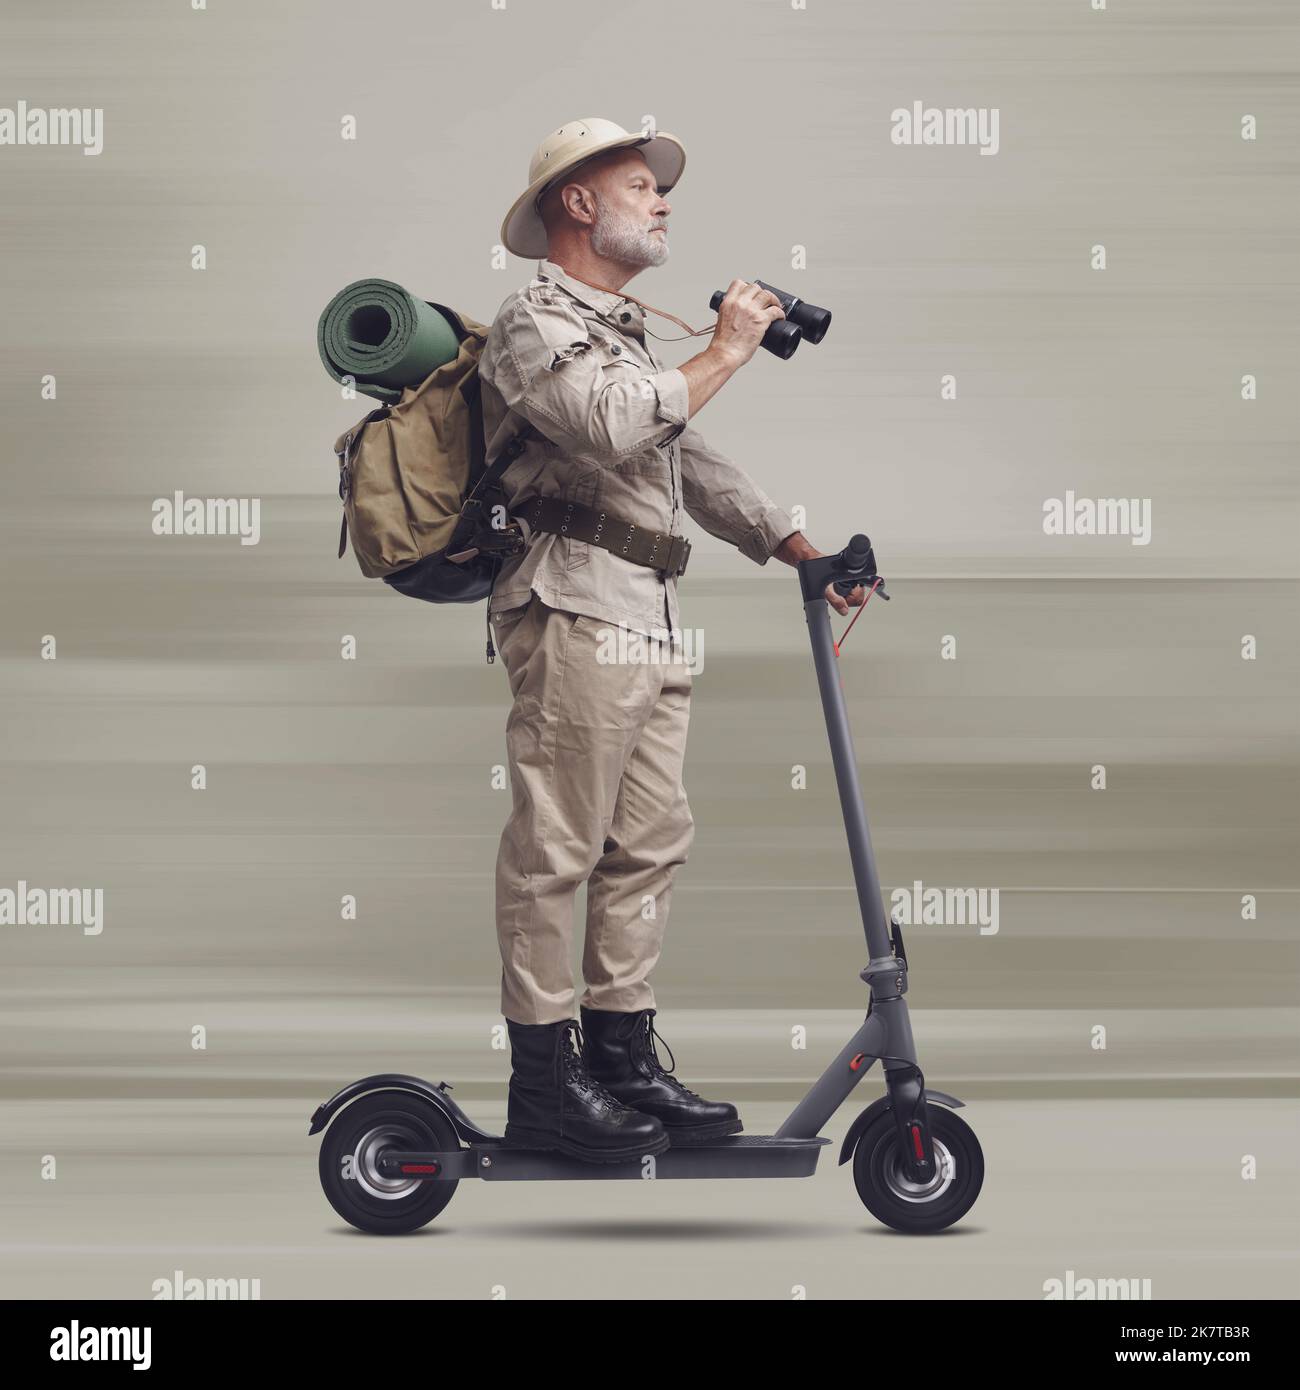 Funny explorer riding a fast electric scooter and holding binoculars Stock Photo